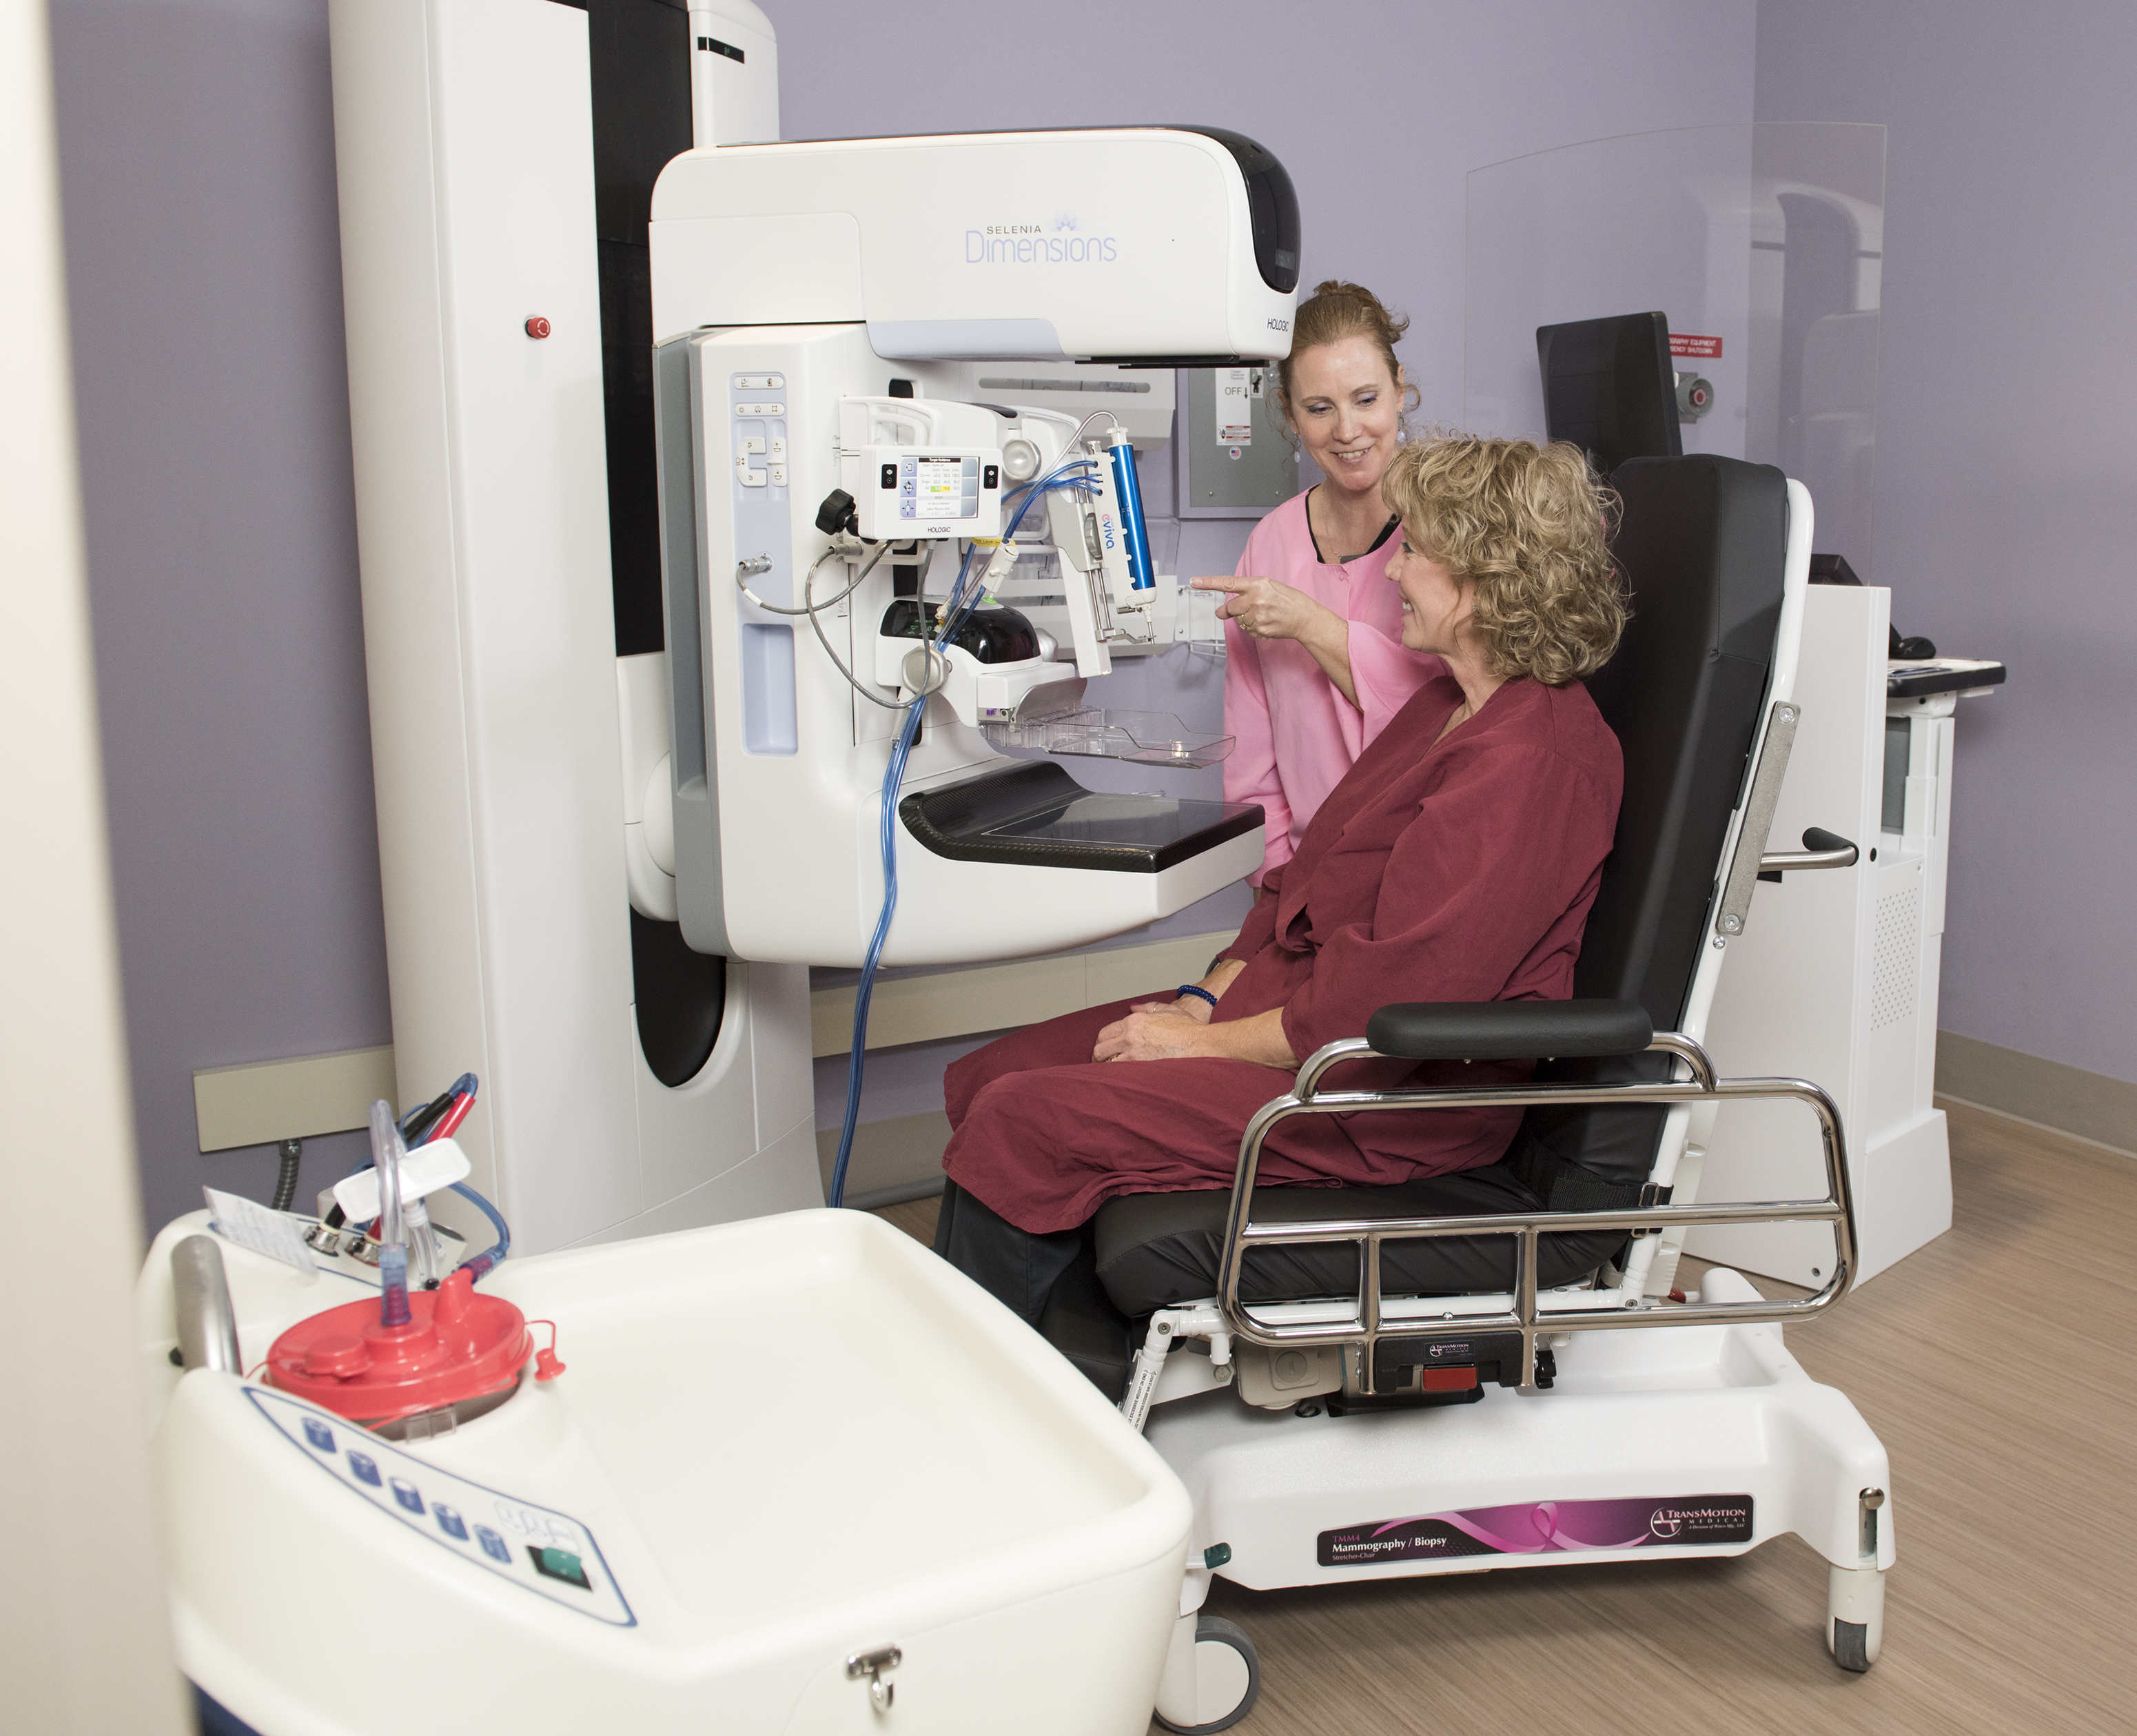 Upstate offers a 3-D guided breast biopsy option for patients whose mammograms reveal something suspicious that requires additional investigation. Using this system, radiologists can easily locate and target regions of interest for what is known as an upright core breast biopsy. The patient, seated in a comfortable chair, is positioned the same way as for a mammogram. After images pinpoint the exact location for the biopsy, a small incision is made, and a thin needle is inserted to retrieve tissue samples for analysis